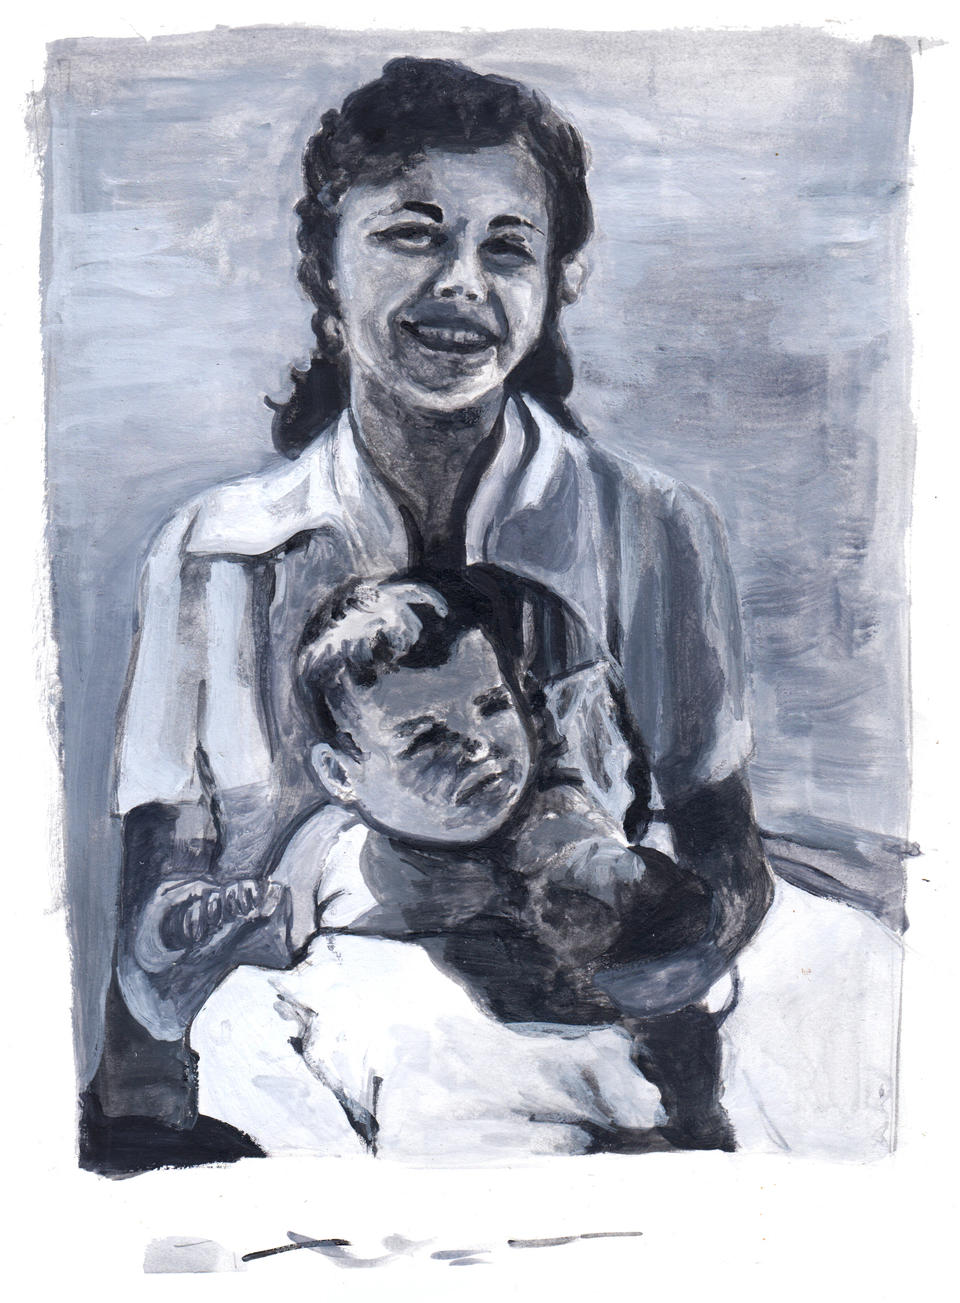 A black and white gouache painting of a woman holding a baby. My great grandma Hildy and my grandma Laurie.